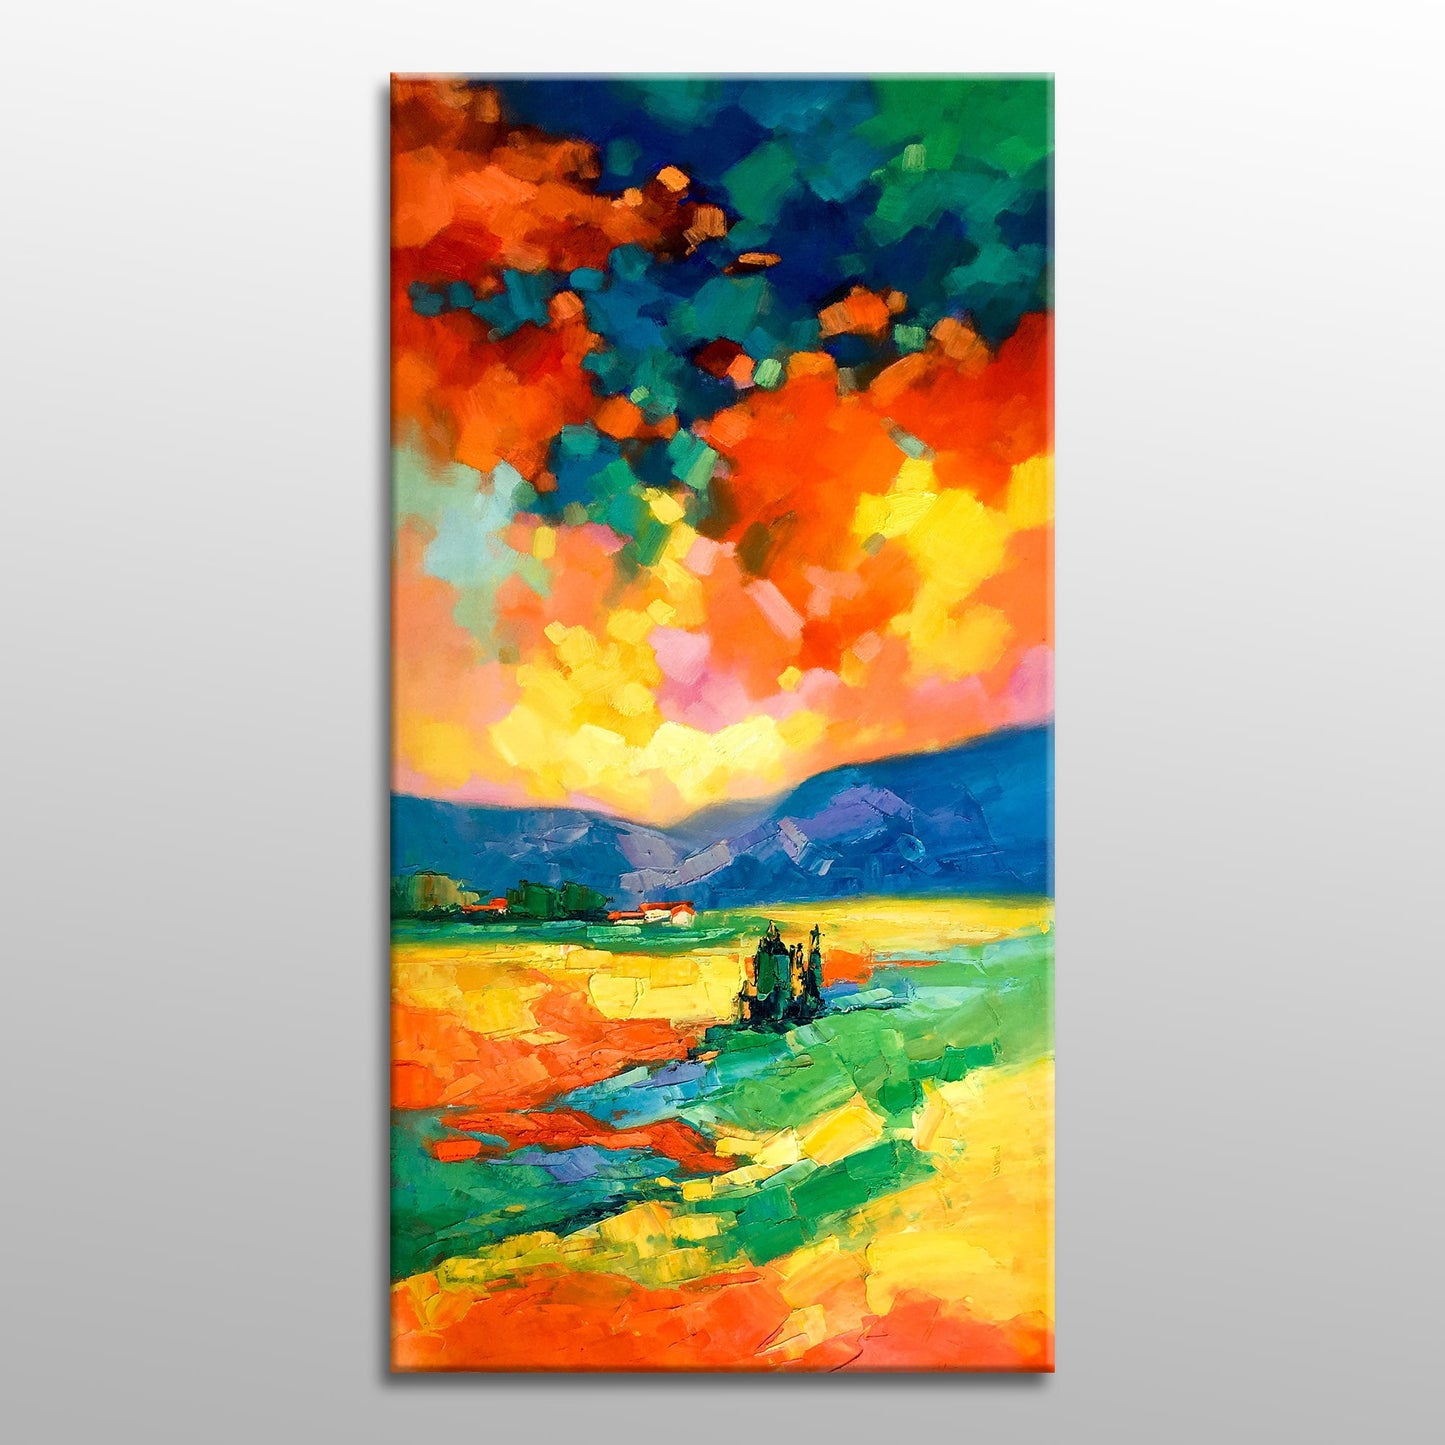 Oil Painting Landscape Abstract Canvas Painting, Abstract Oil Painting, Large Art, Original Art, Contemporary Painting, Italy Tuscany Spring